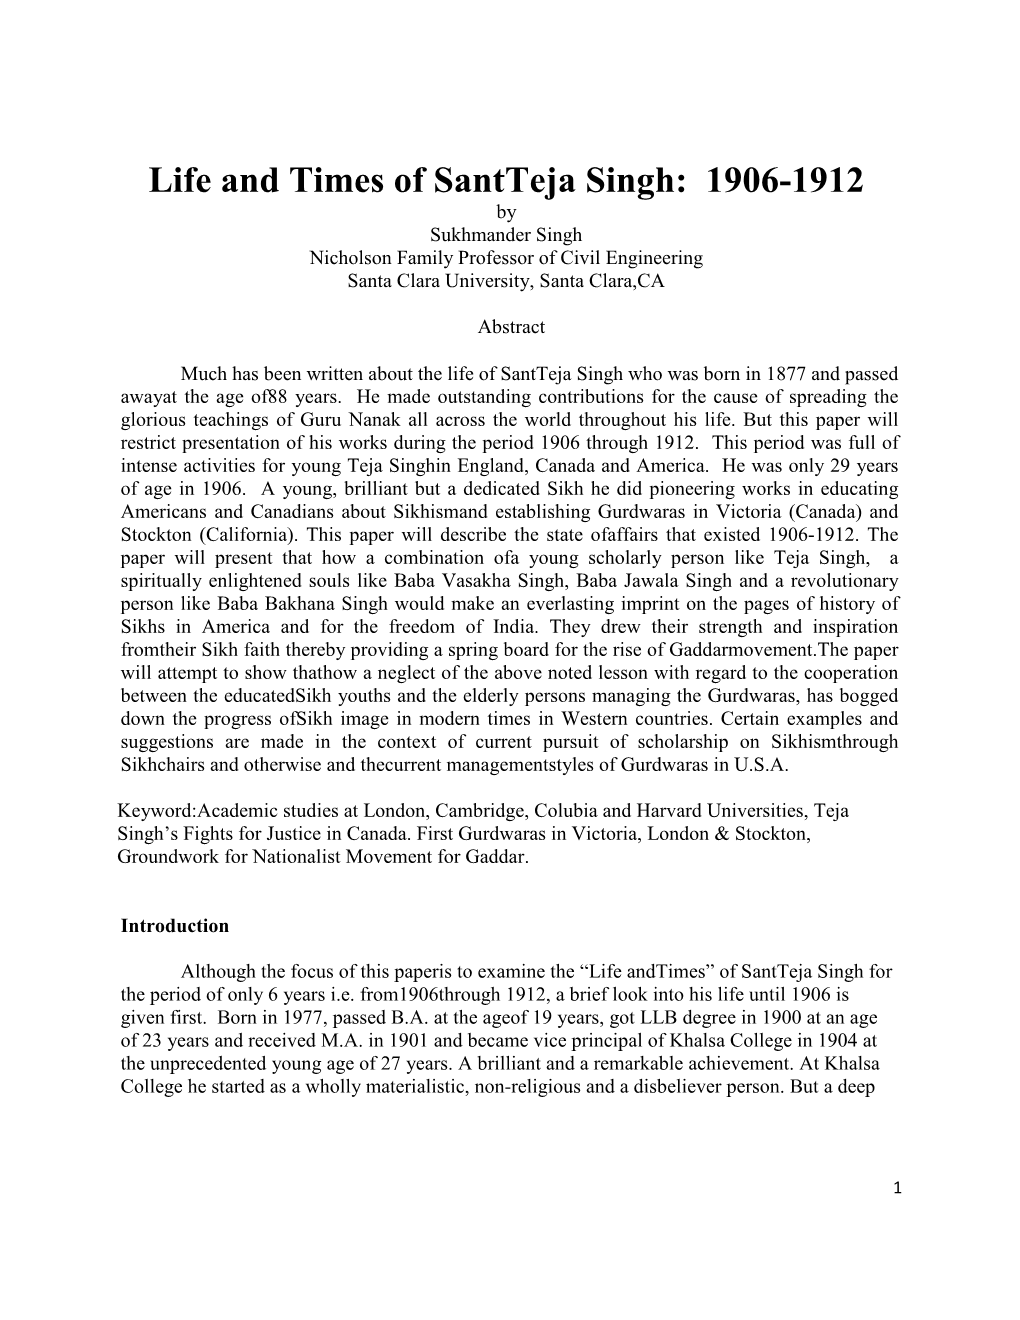 Life and Times of Sant Teja Singh, 1906-1912